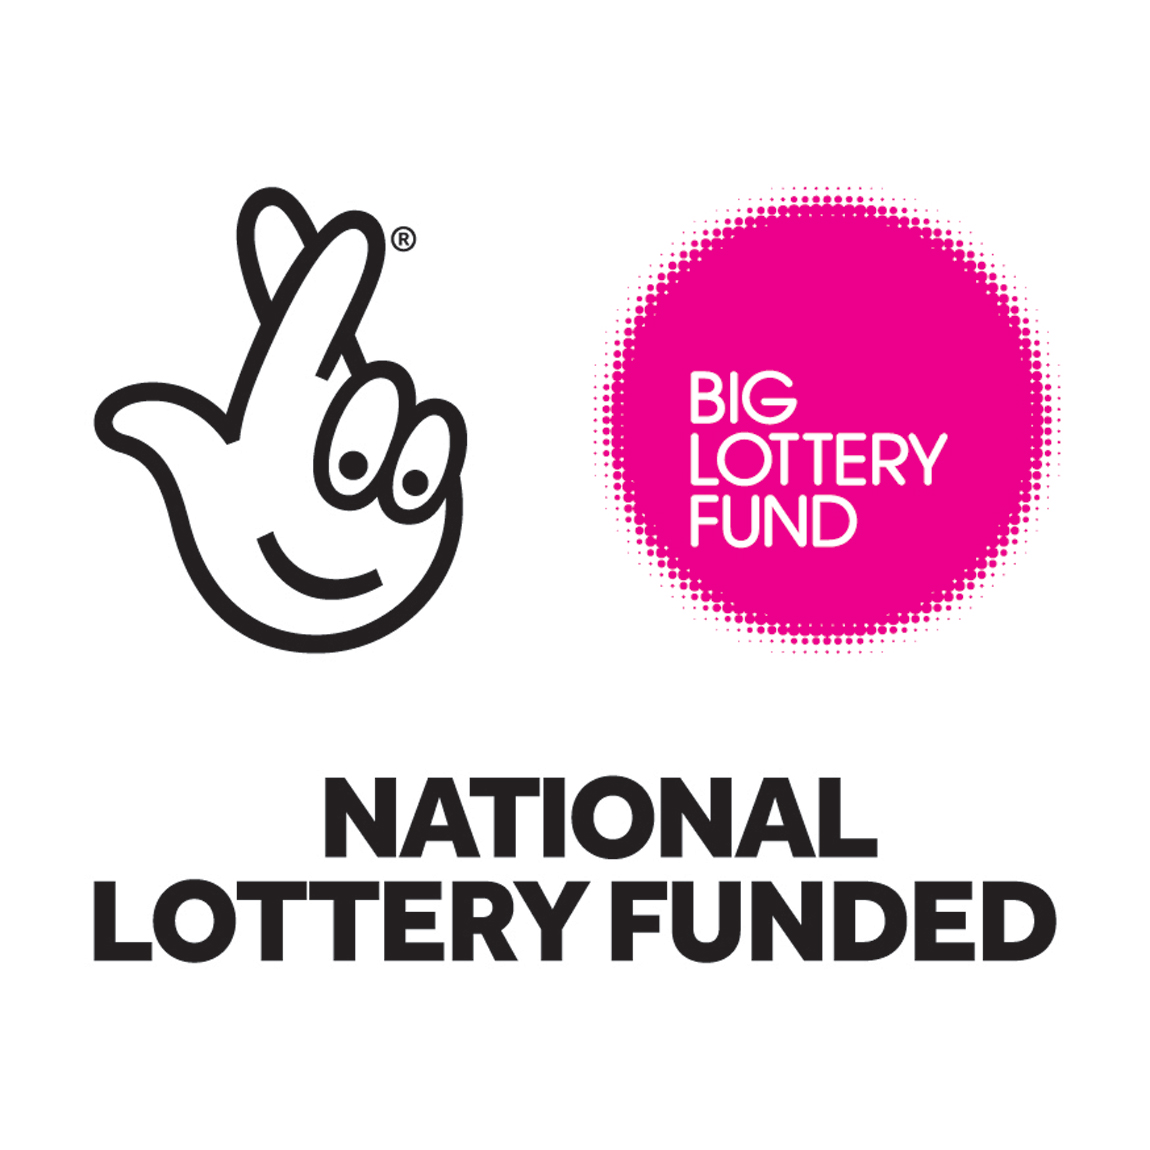 Big Lottery Fund from the National Lottery